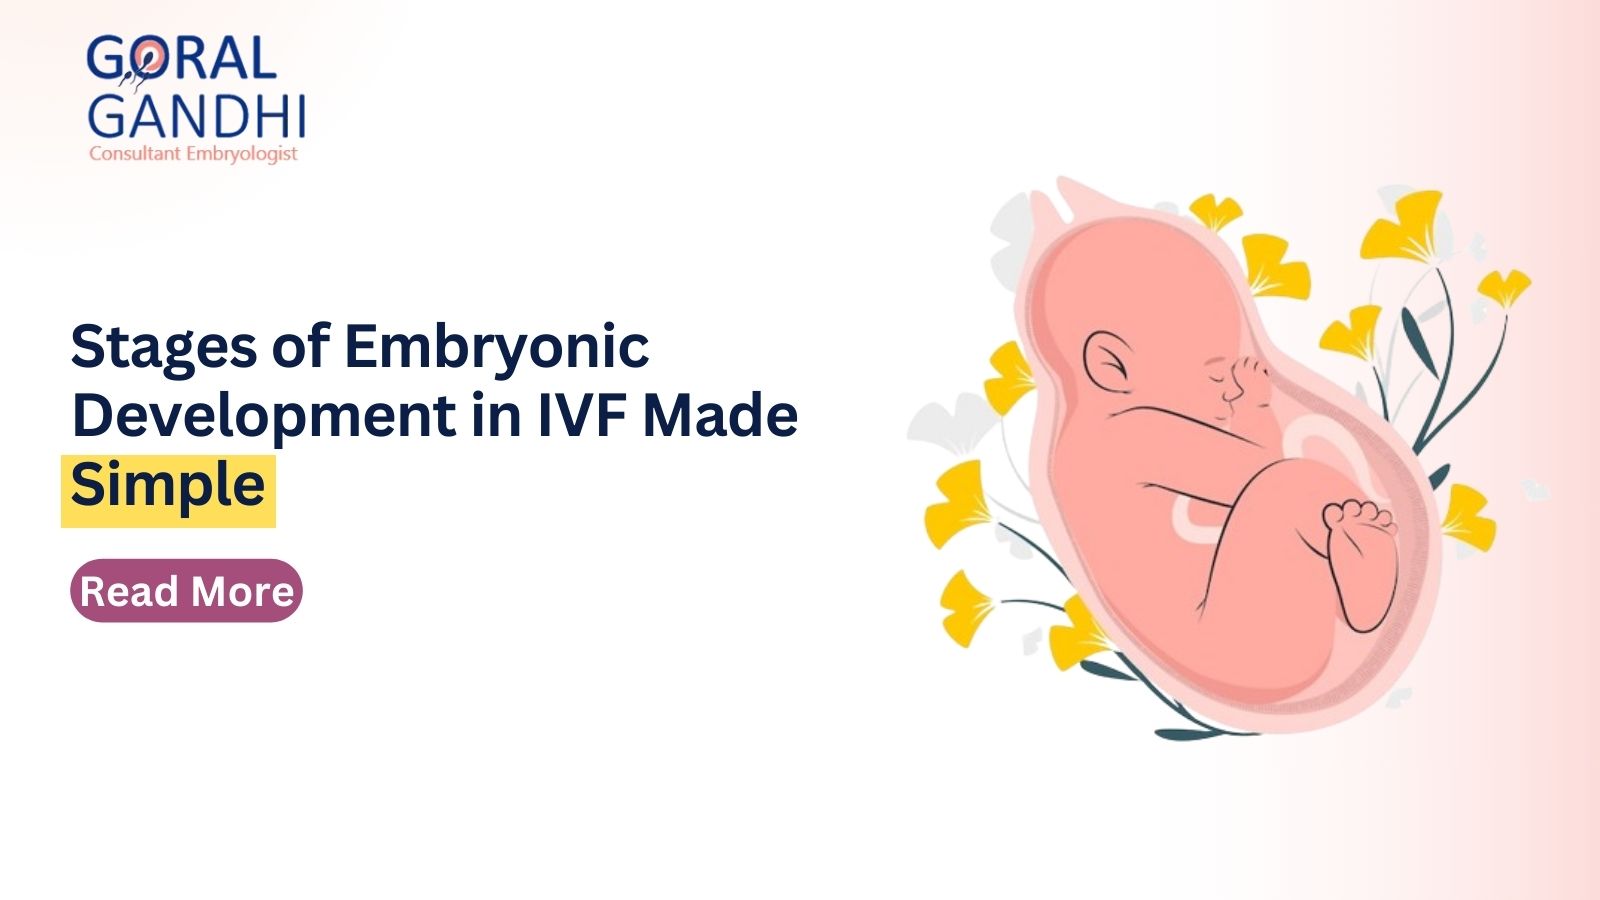 Stages of Embryonic Development in IVF Made Simple